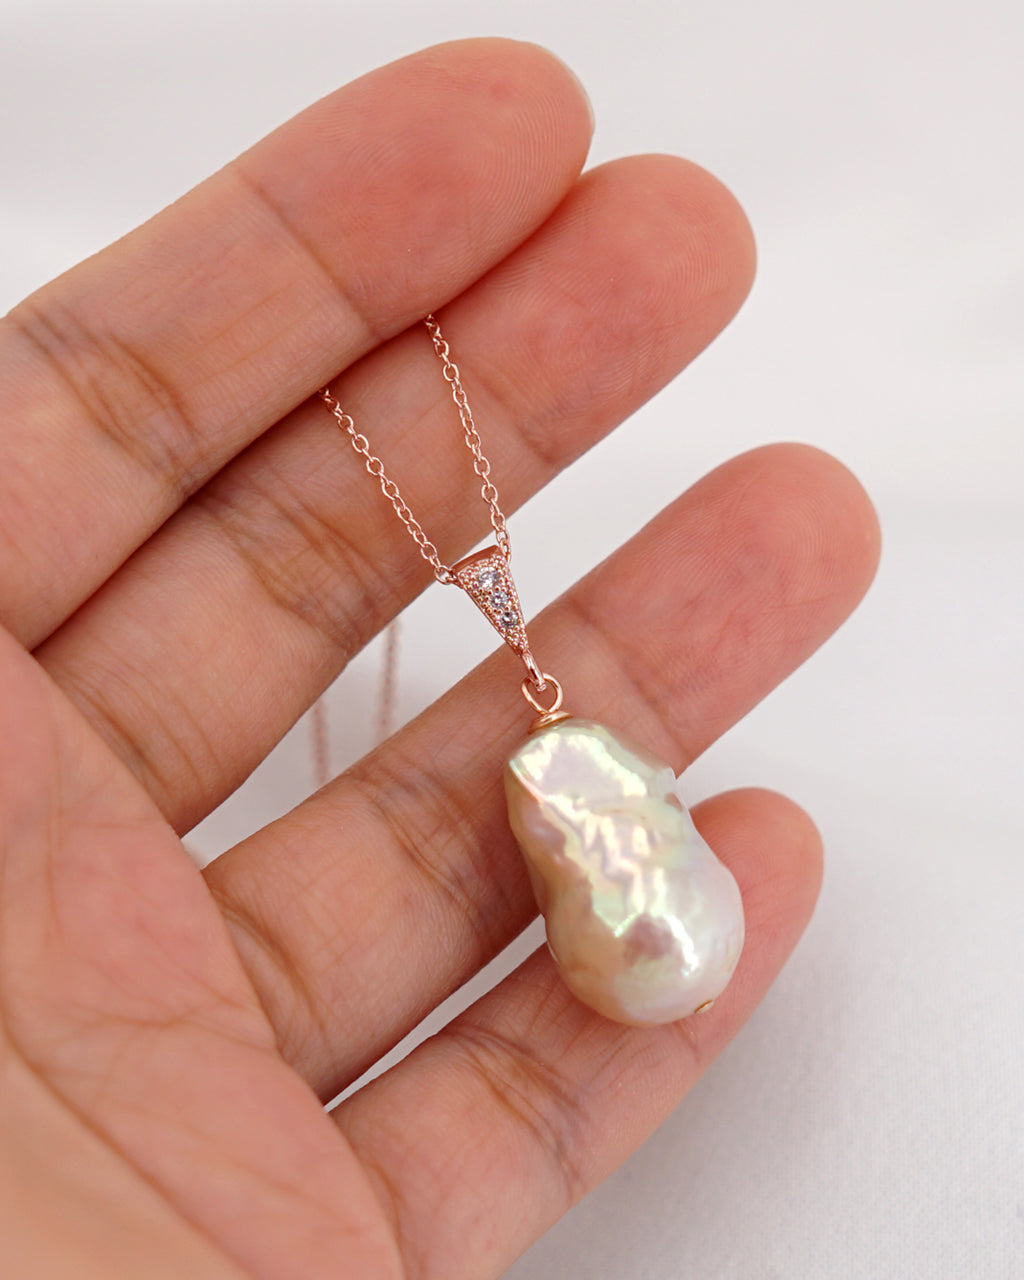 White Baroque Pearl Pendant Necklace - Modern Chic Jewelry Gifts